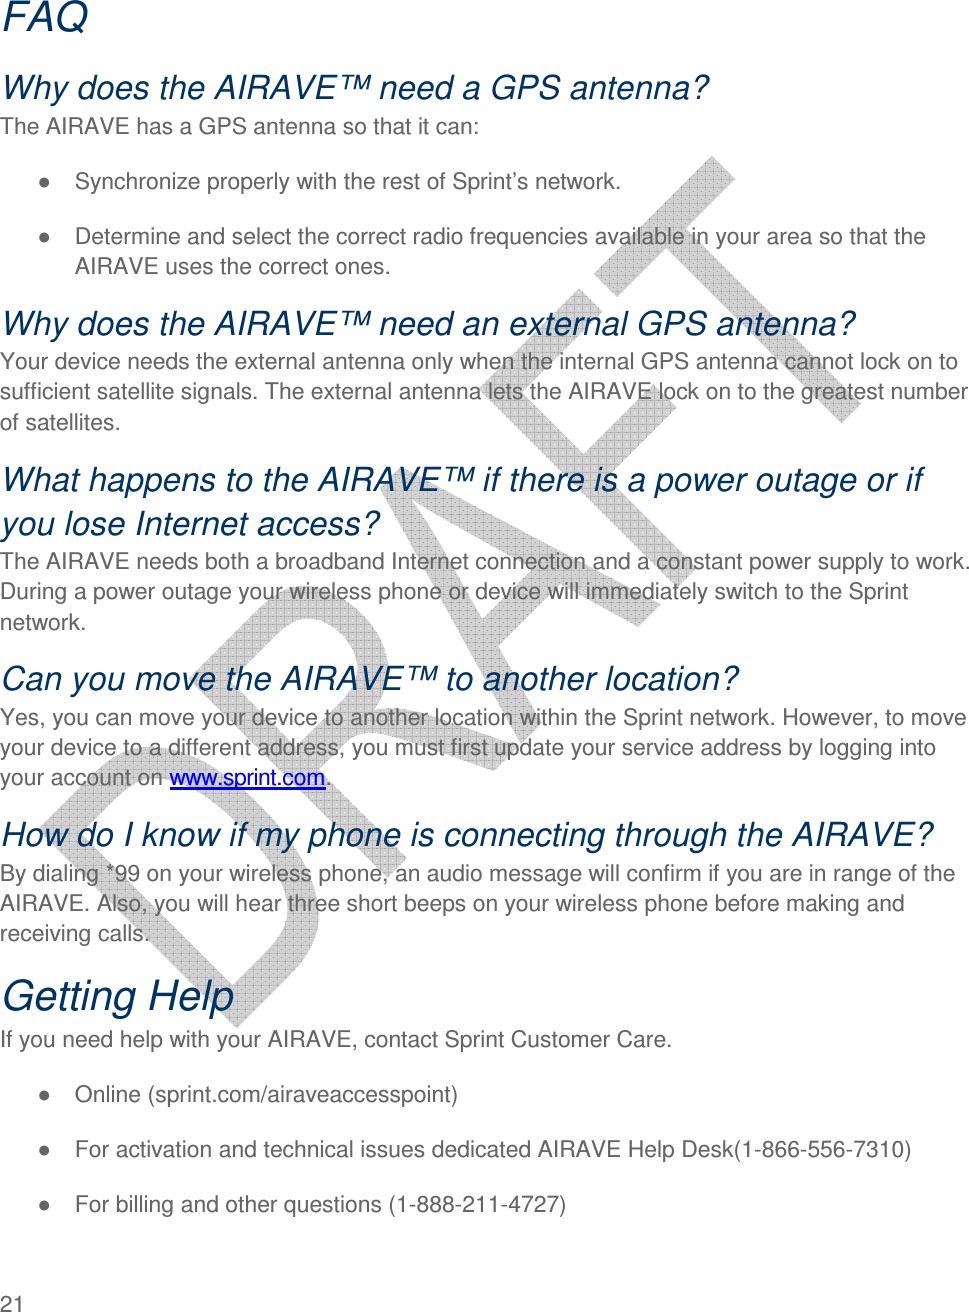  21    FAQ Why does the AIRAVE™ need a GPS antenna? The AIRAVE has a GPS antenna so that it can: ●  Synchronize properly with the rest of Sprint’s network.  ●  Determine and select the correct radio frequencies available in your area so that the AIRAVE uses the correct ones.  Why does the AIRAVE™ need an external GPS antenna? Your device needs the external antenna only when the internal GPS antenna cannot lock on to sufficient satellite signals. The external antenna lets the AIRAVE lock on to the greatest number of satellites. What happens to the AIRAVE™ if there is a power outage or if you lose Internet access? The AIRAVE needs both a broadband Internet connection and a constant power supply to work. During a power outage your wireless phone or device will immediately switch to the Sprint network.  Can you move the AIRAVE™ to another location? Yes, you can move your device to another location within the Sprint network. However, to move your device to a different address, you must first update your service address by logging into your account on www.sprint.com.  How do I know if my phone is connecting through the AIRAVE? By dialing *99 on your wireless phone, an audio message will confirm if you are in range of the AIRAVE. Also, you will hear three short beeps on your wireless phone before making and receiving calls. Getting Help If you need help with your AIRAVE, contact Sprint Customer Care. ●  Online (sprint.com/airaveaccesspoint) ●  For activation and technical issues dedicated AIRAVE Help Desk(1-866-556-7310) ●  For billing and other questions (1-888-211-4727) 